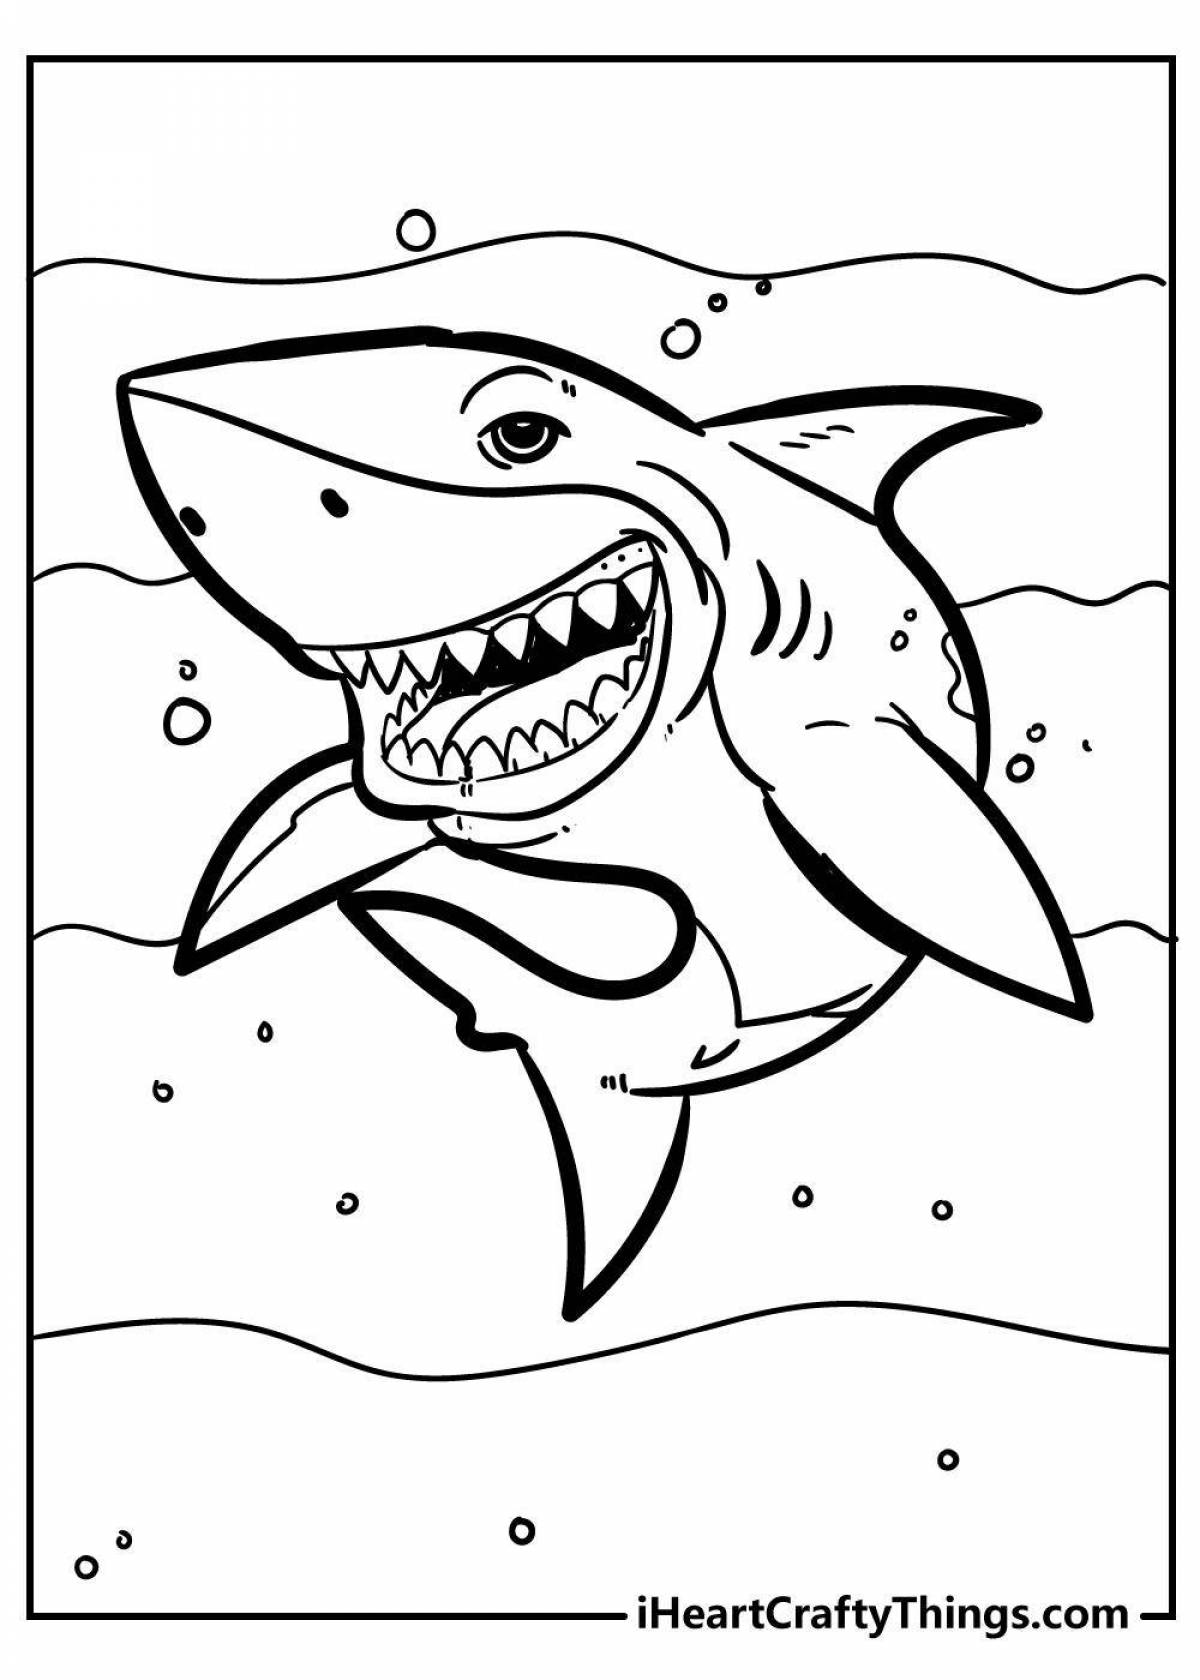 Robo shark coloring page with rich colors